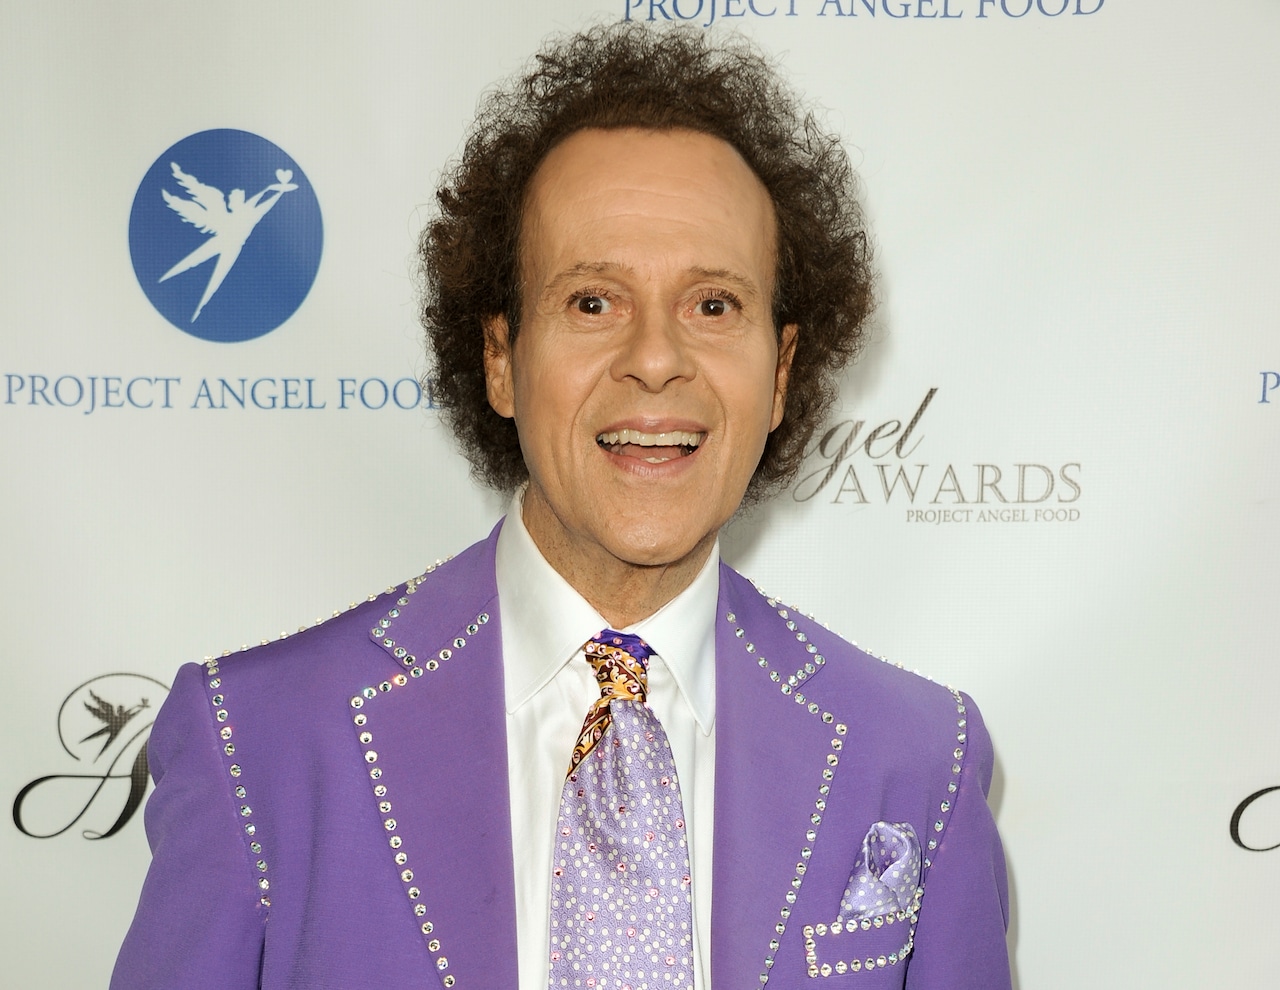 Richard Simmons shares past cancer battle after confusing social media post [Video]